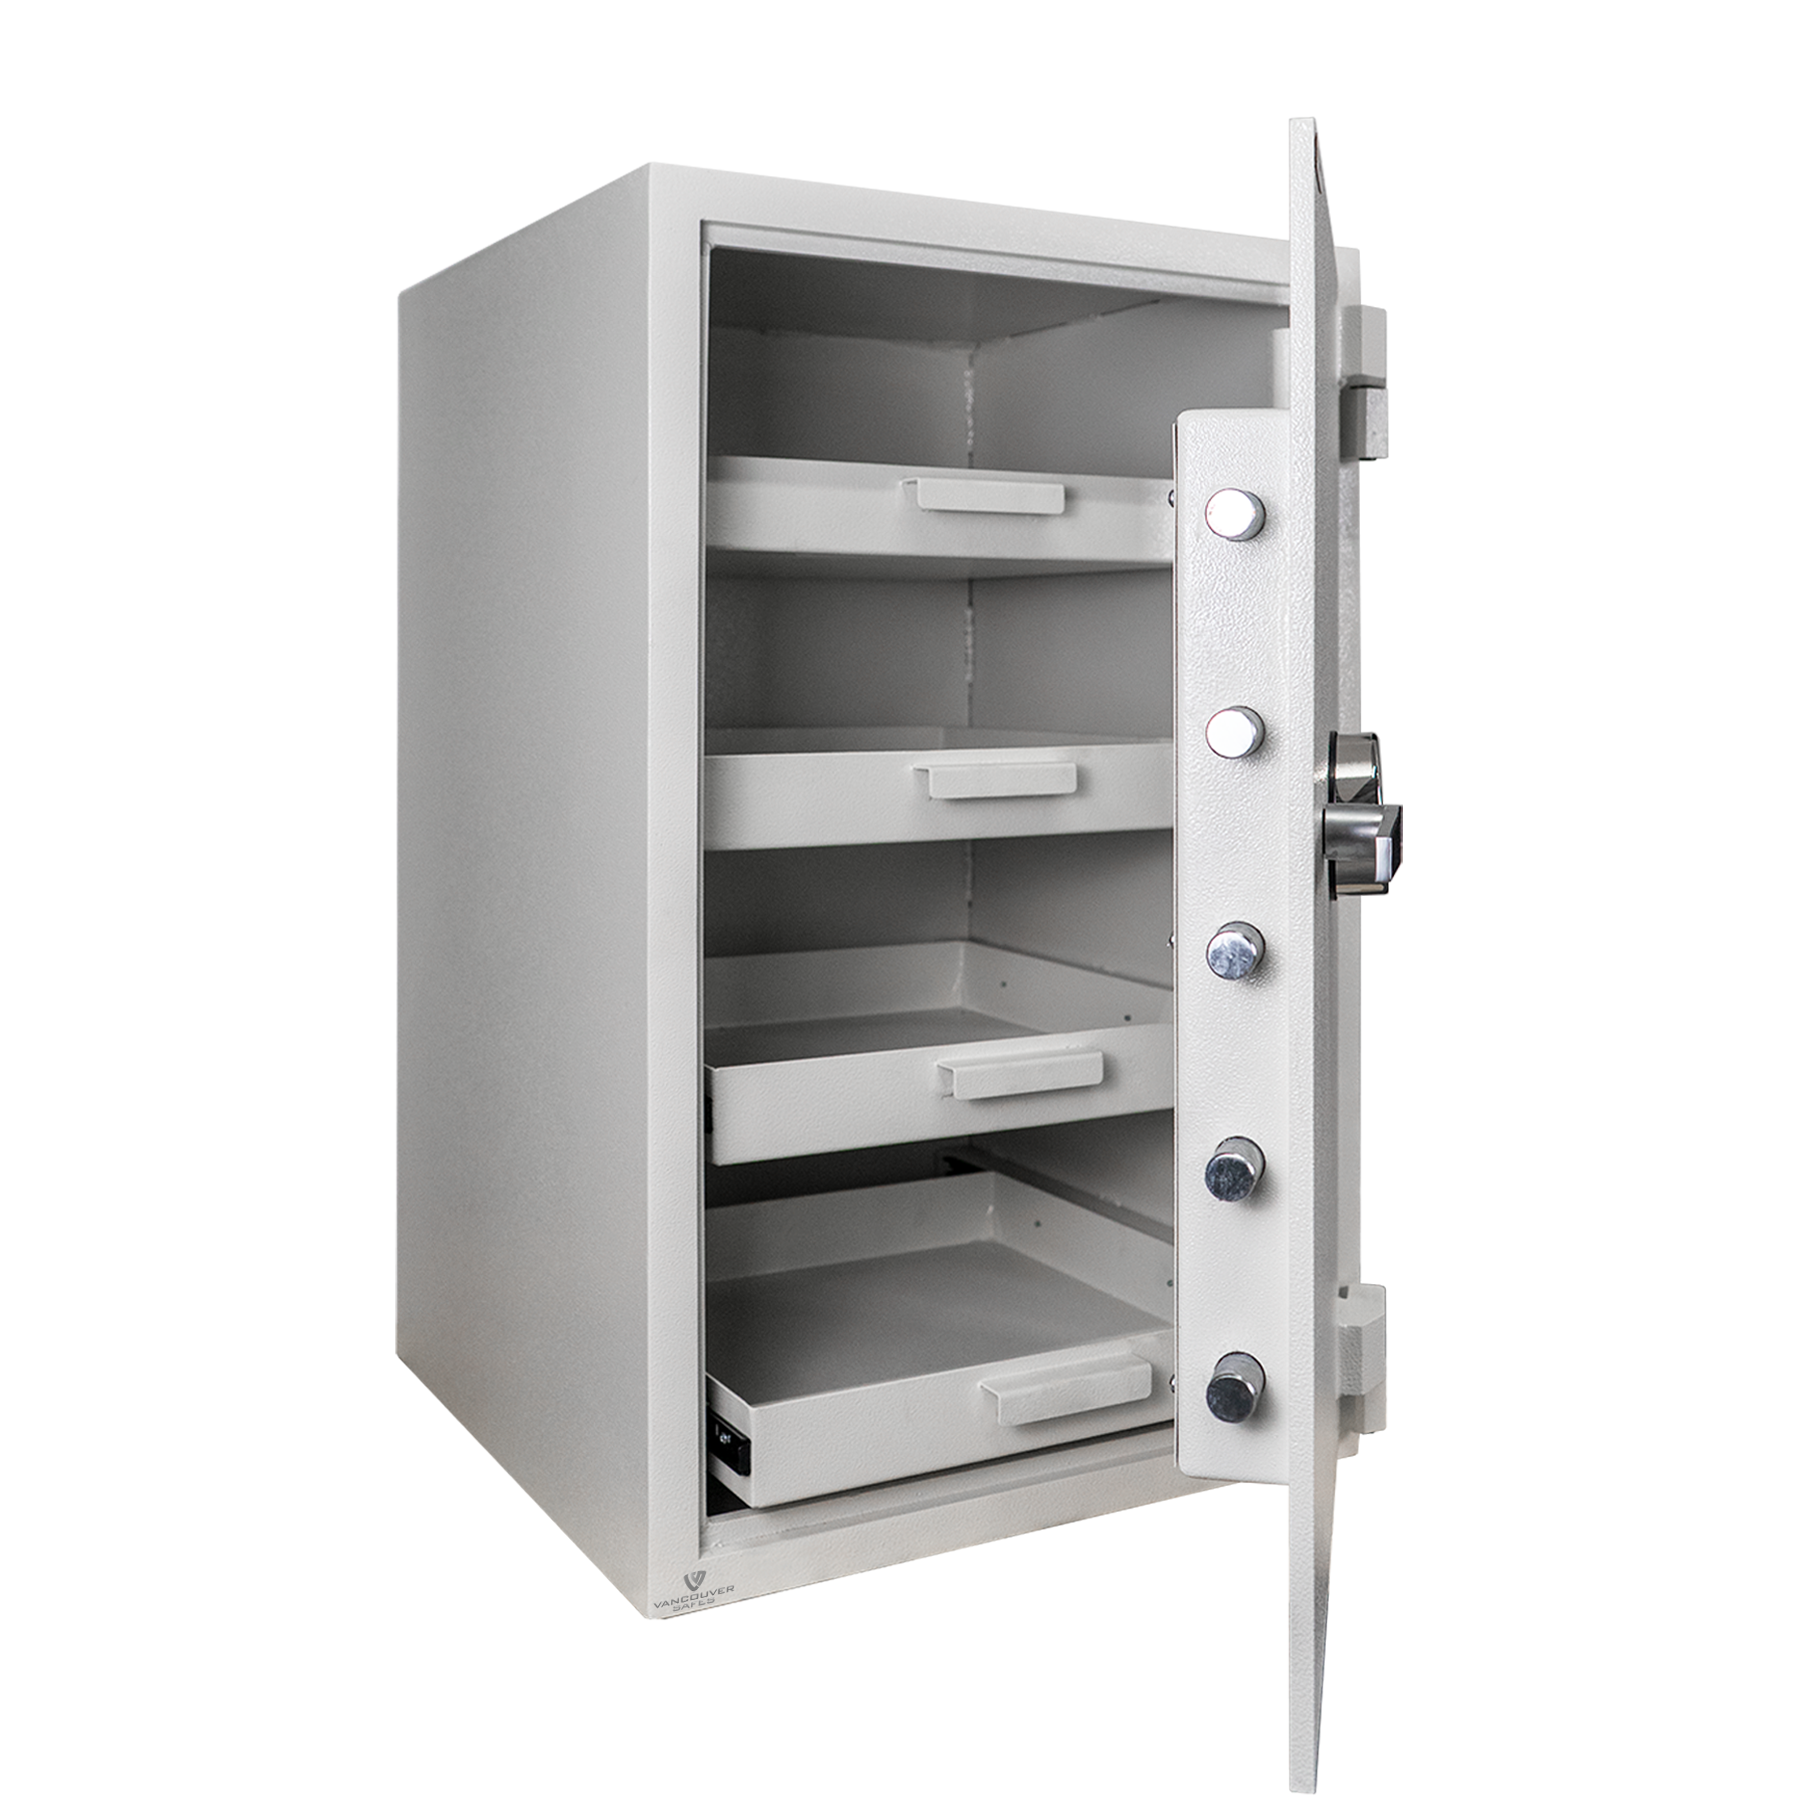 B-3521WD Pharmacy Safe with Time Delay Lock